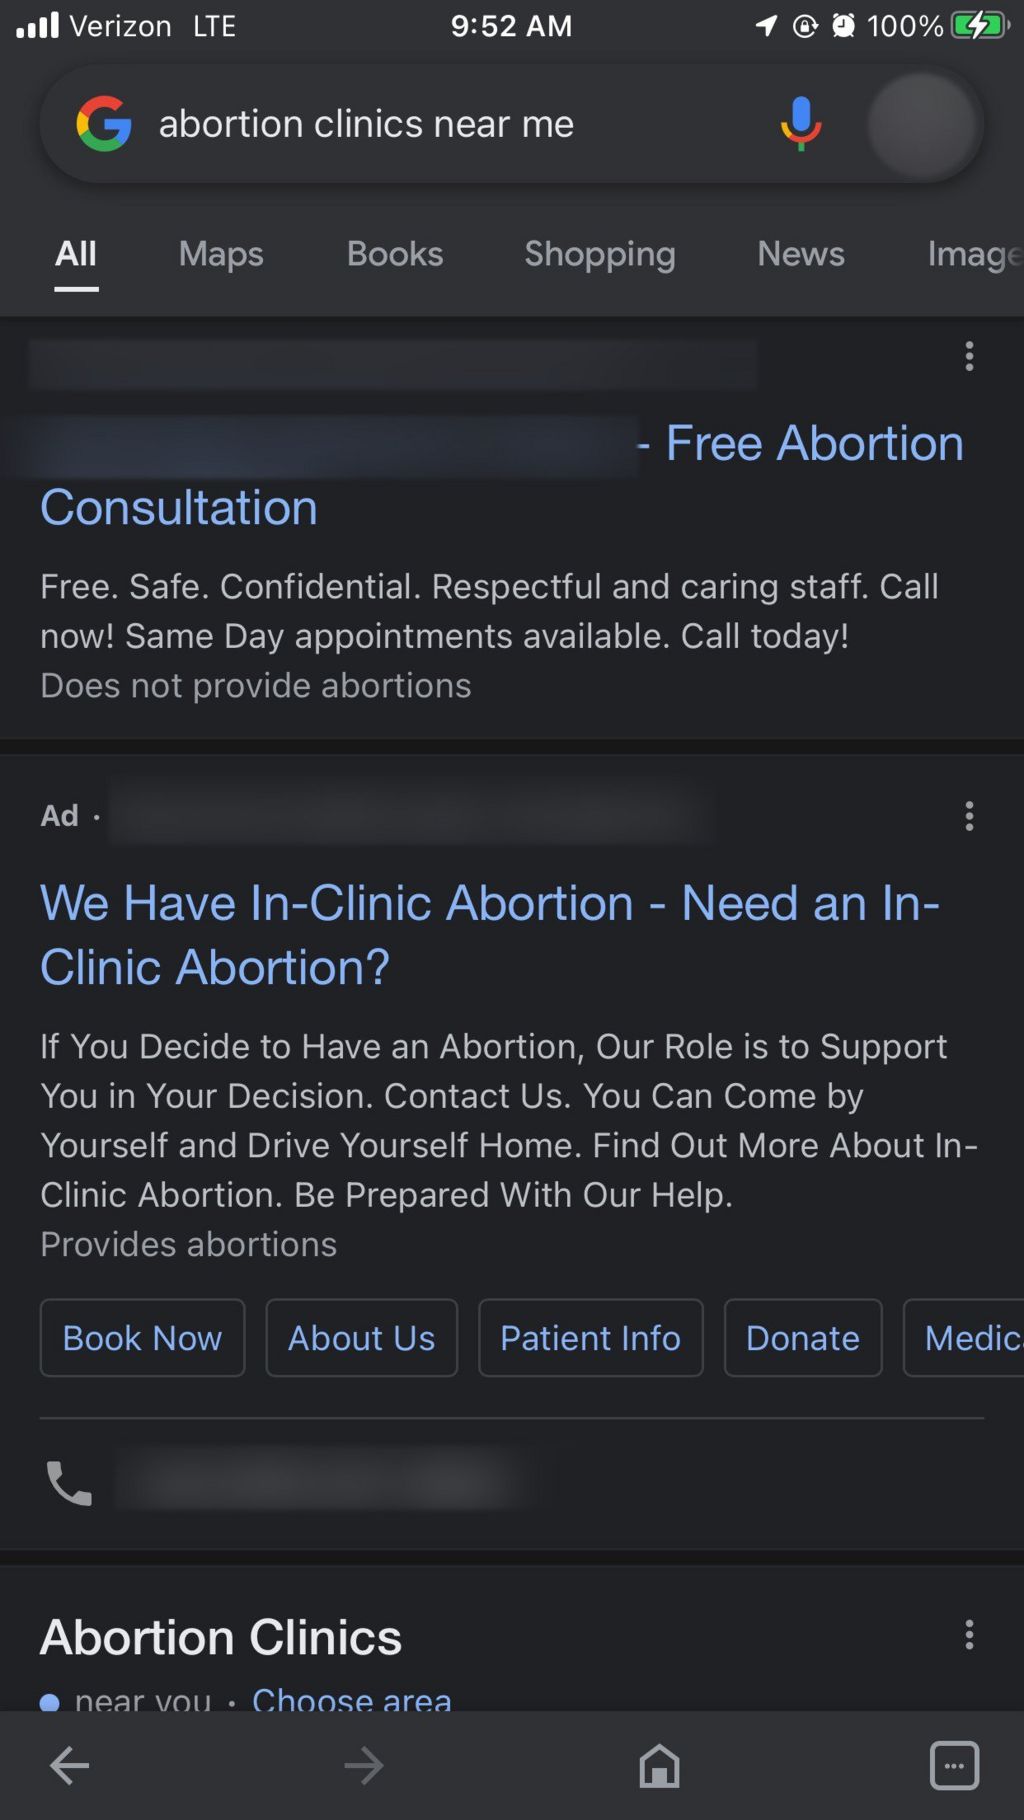 google search results for the term 'abortion clinics near me'. In small letters at the bottom, you can see the words 'Does not provide abortions' for one clinic and 'provides abortions' for another